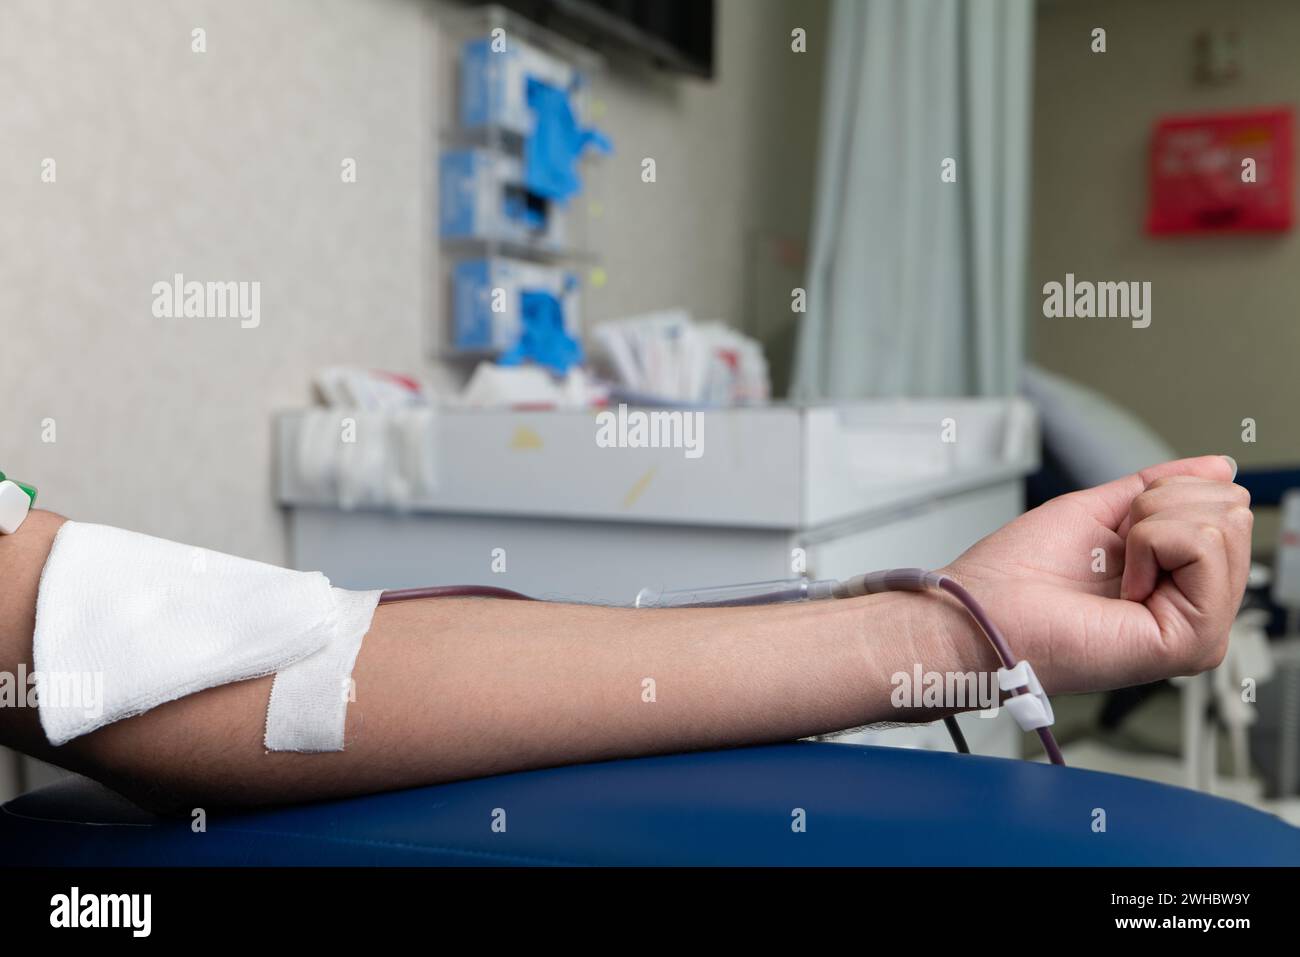 A Person In Gloves Putting A Needle On A Mannequin. Stock Photo